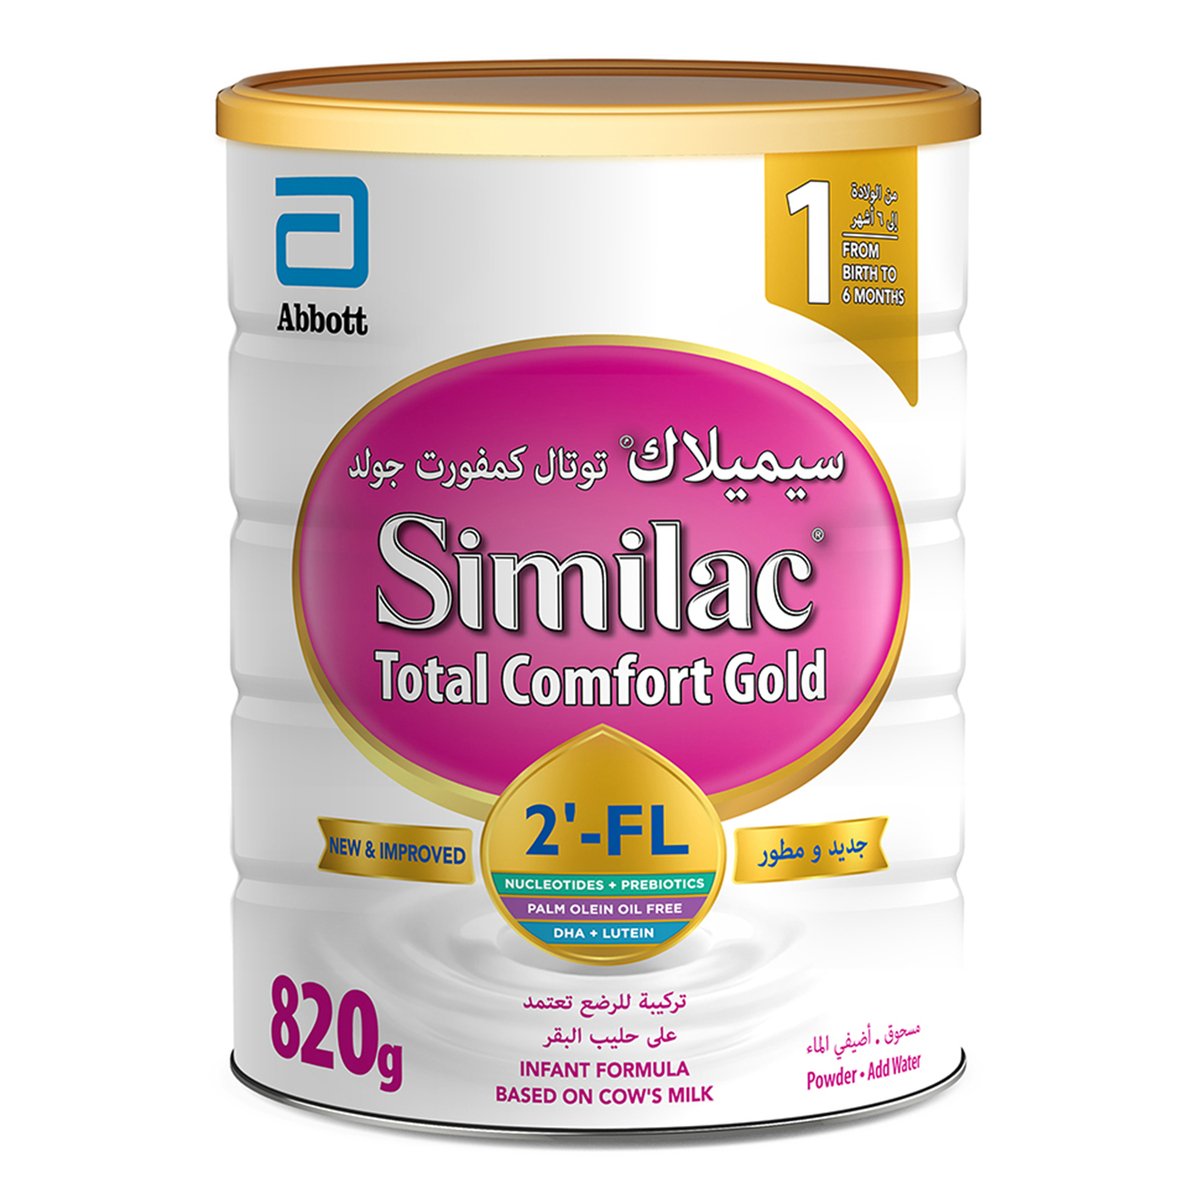 Similac Total Comfort Gold 2'-FL Stage 1 From Birth To 6 Months 820 g  Online at Best Price, Baby milk powders & formula